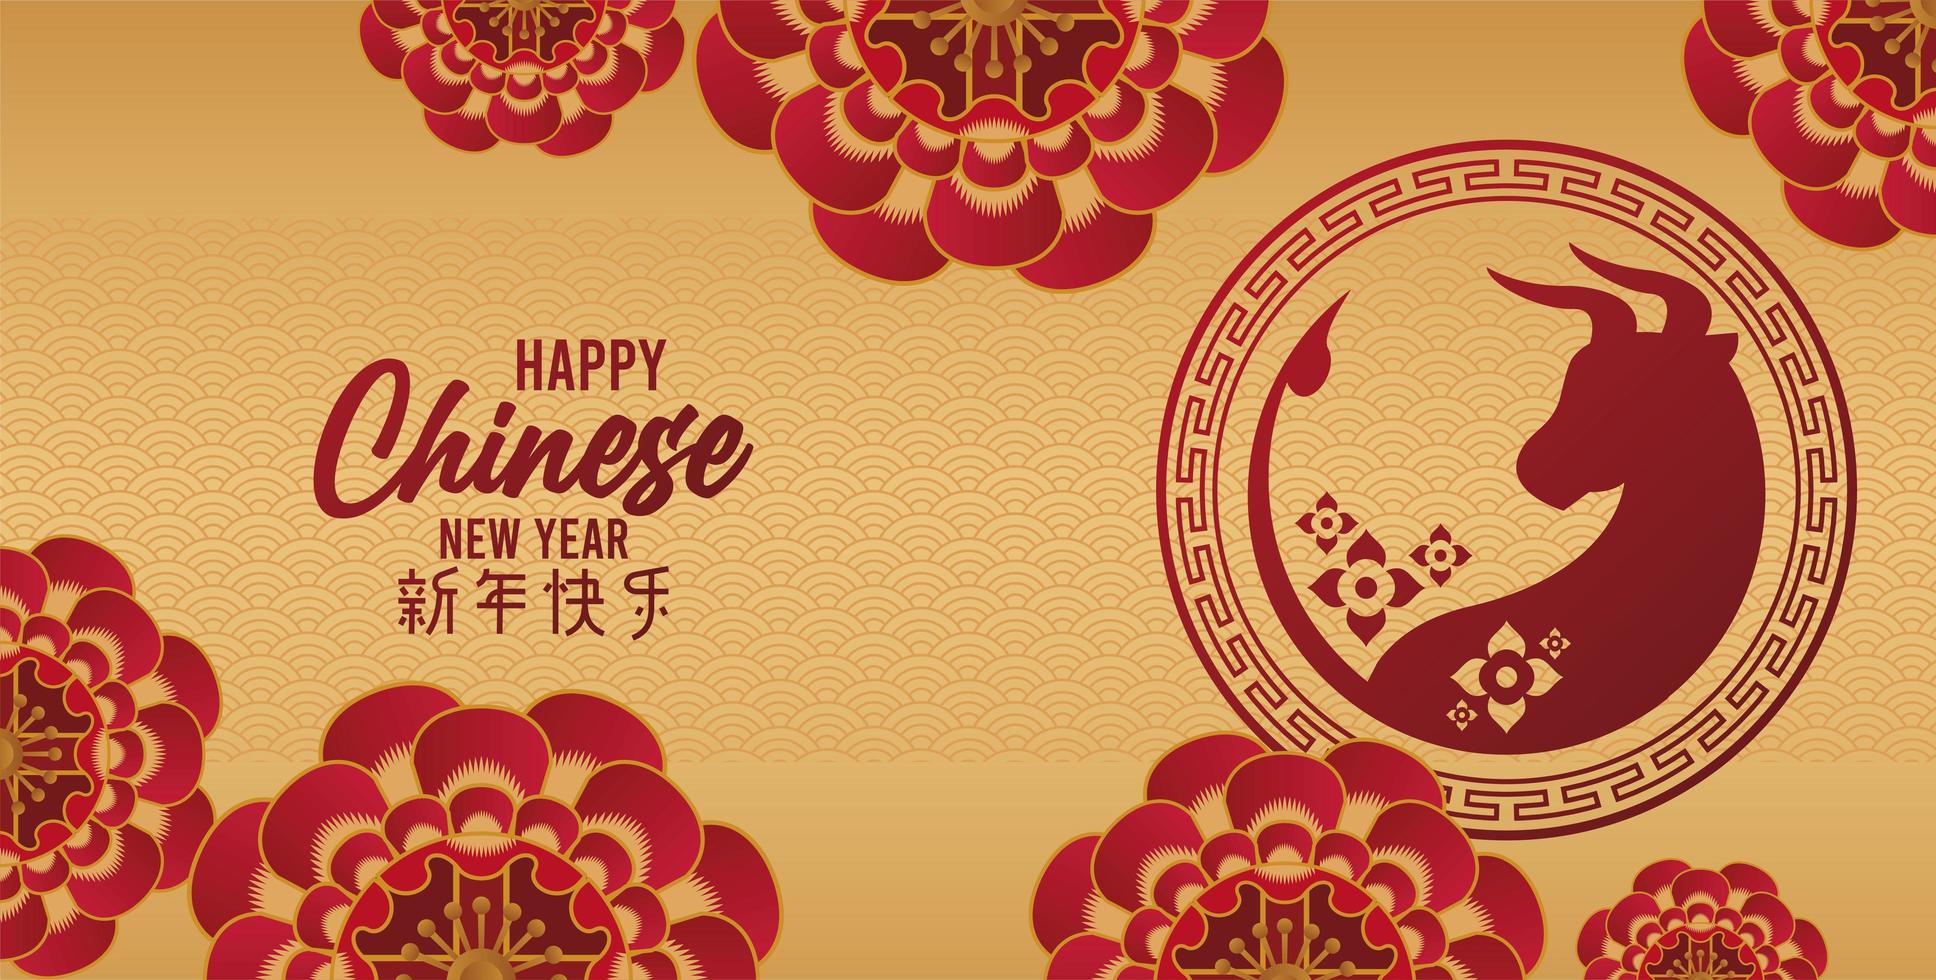 happy chinese new year card with flowers and ox in golden background vector